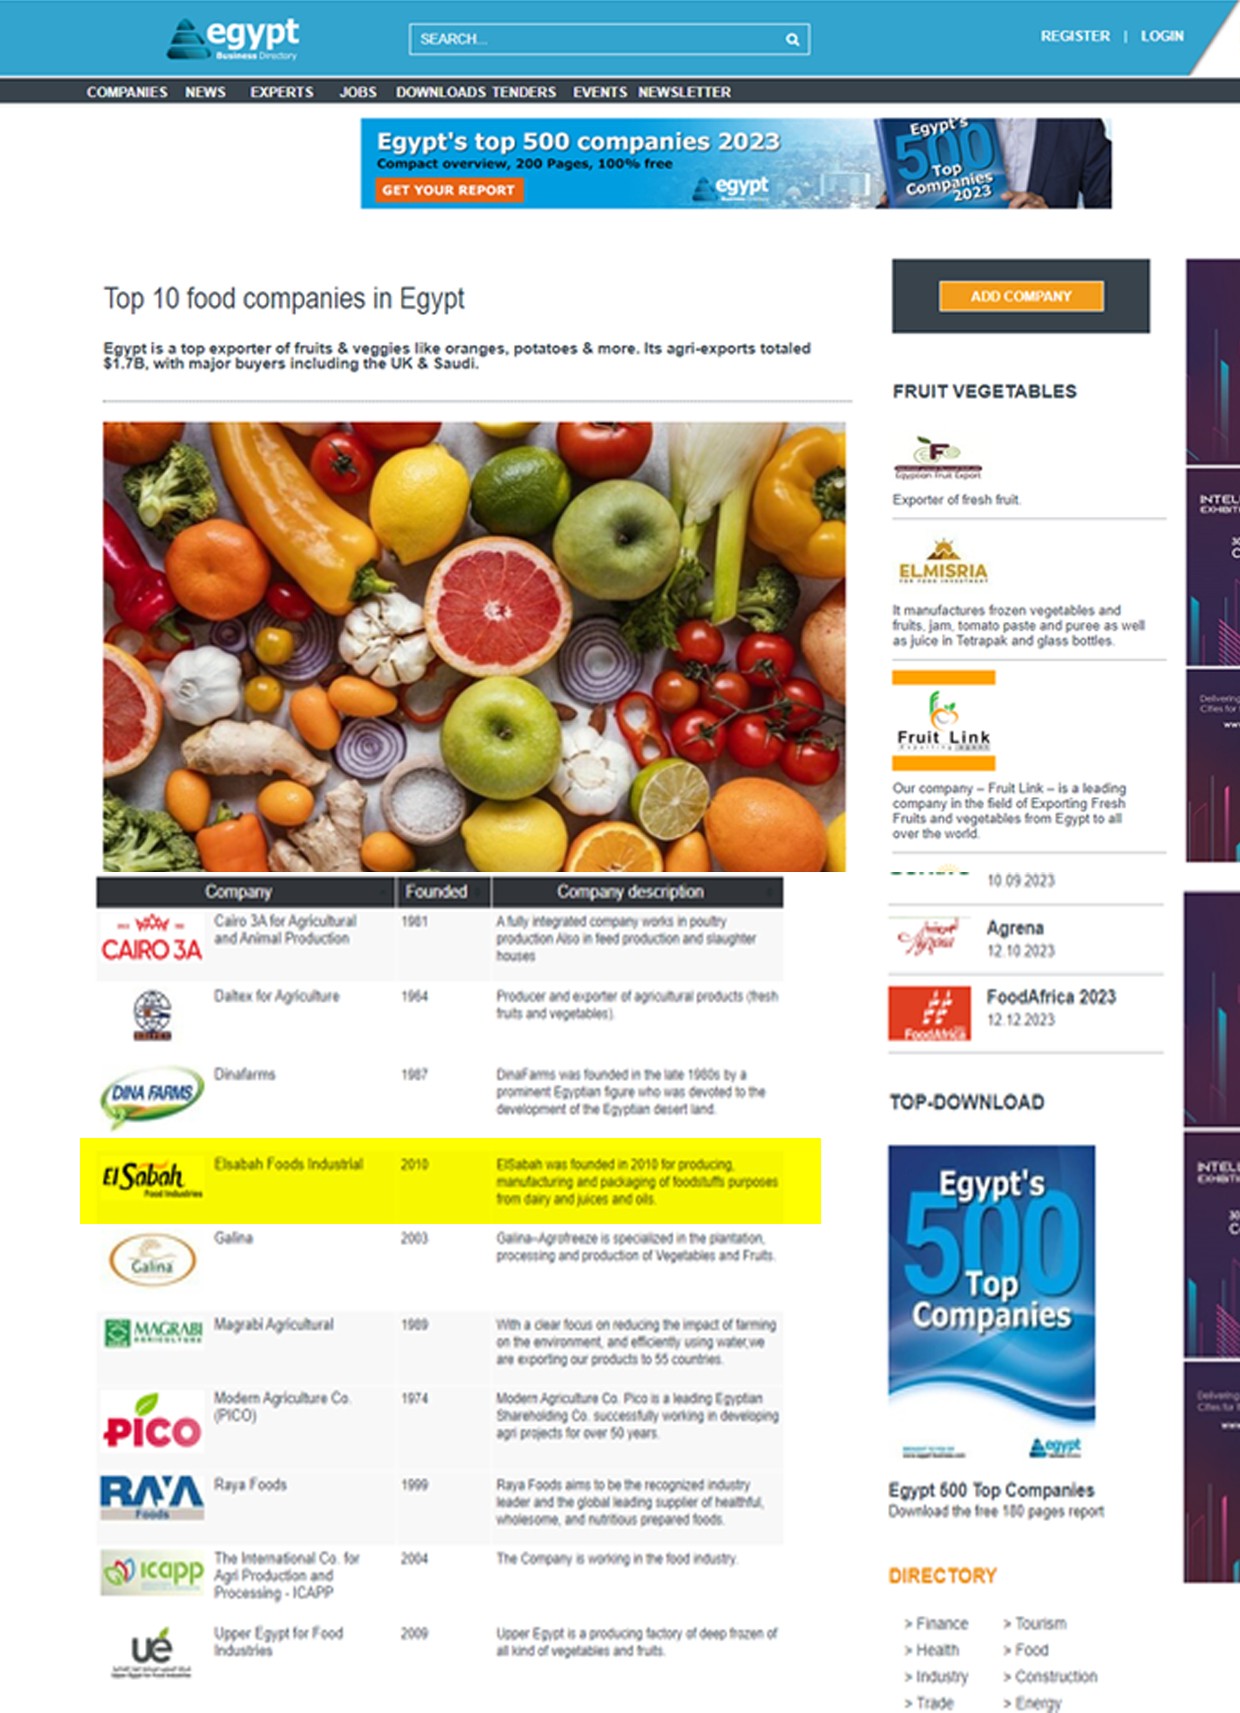 Top 10 food companies in Egypt